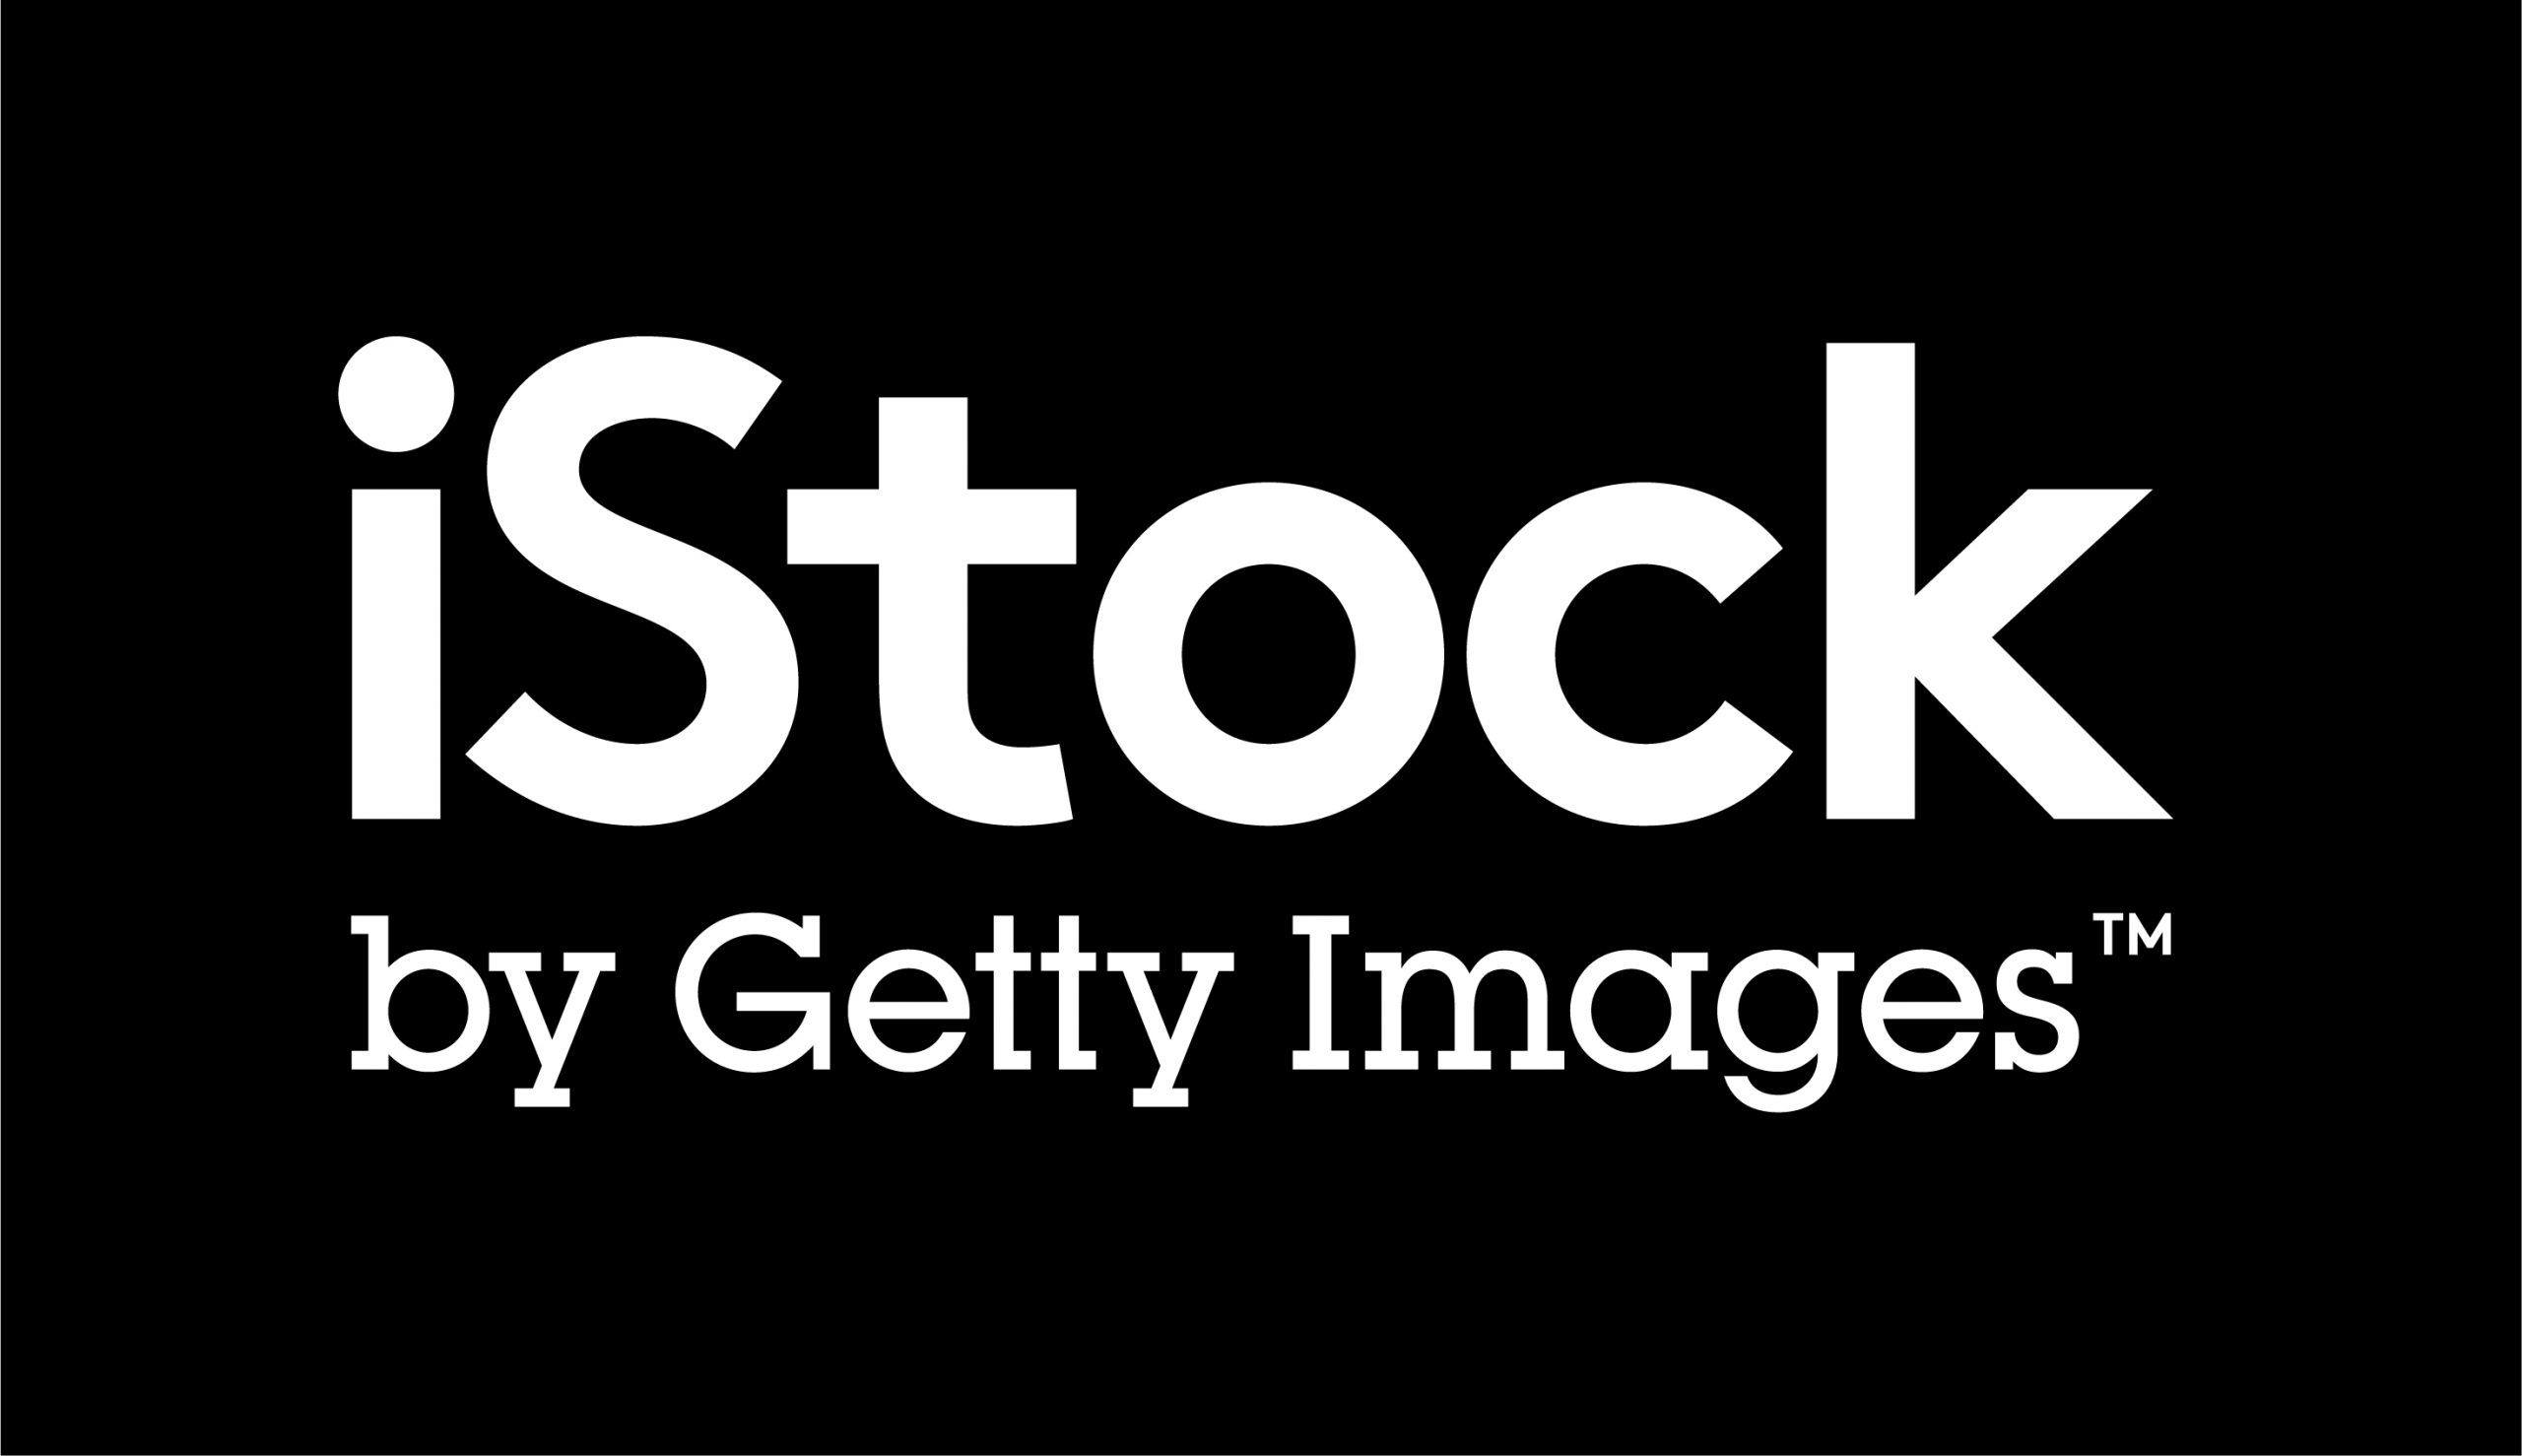 What is iStock